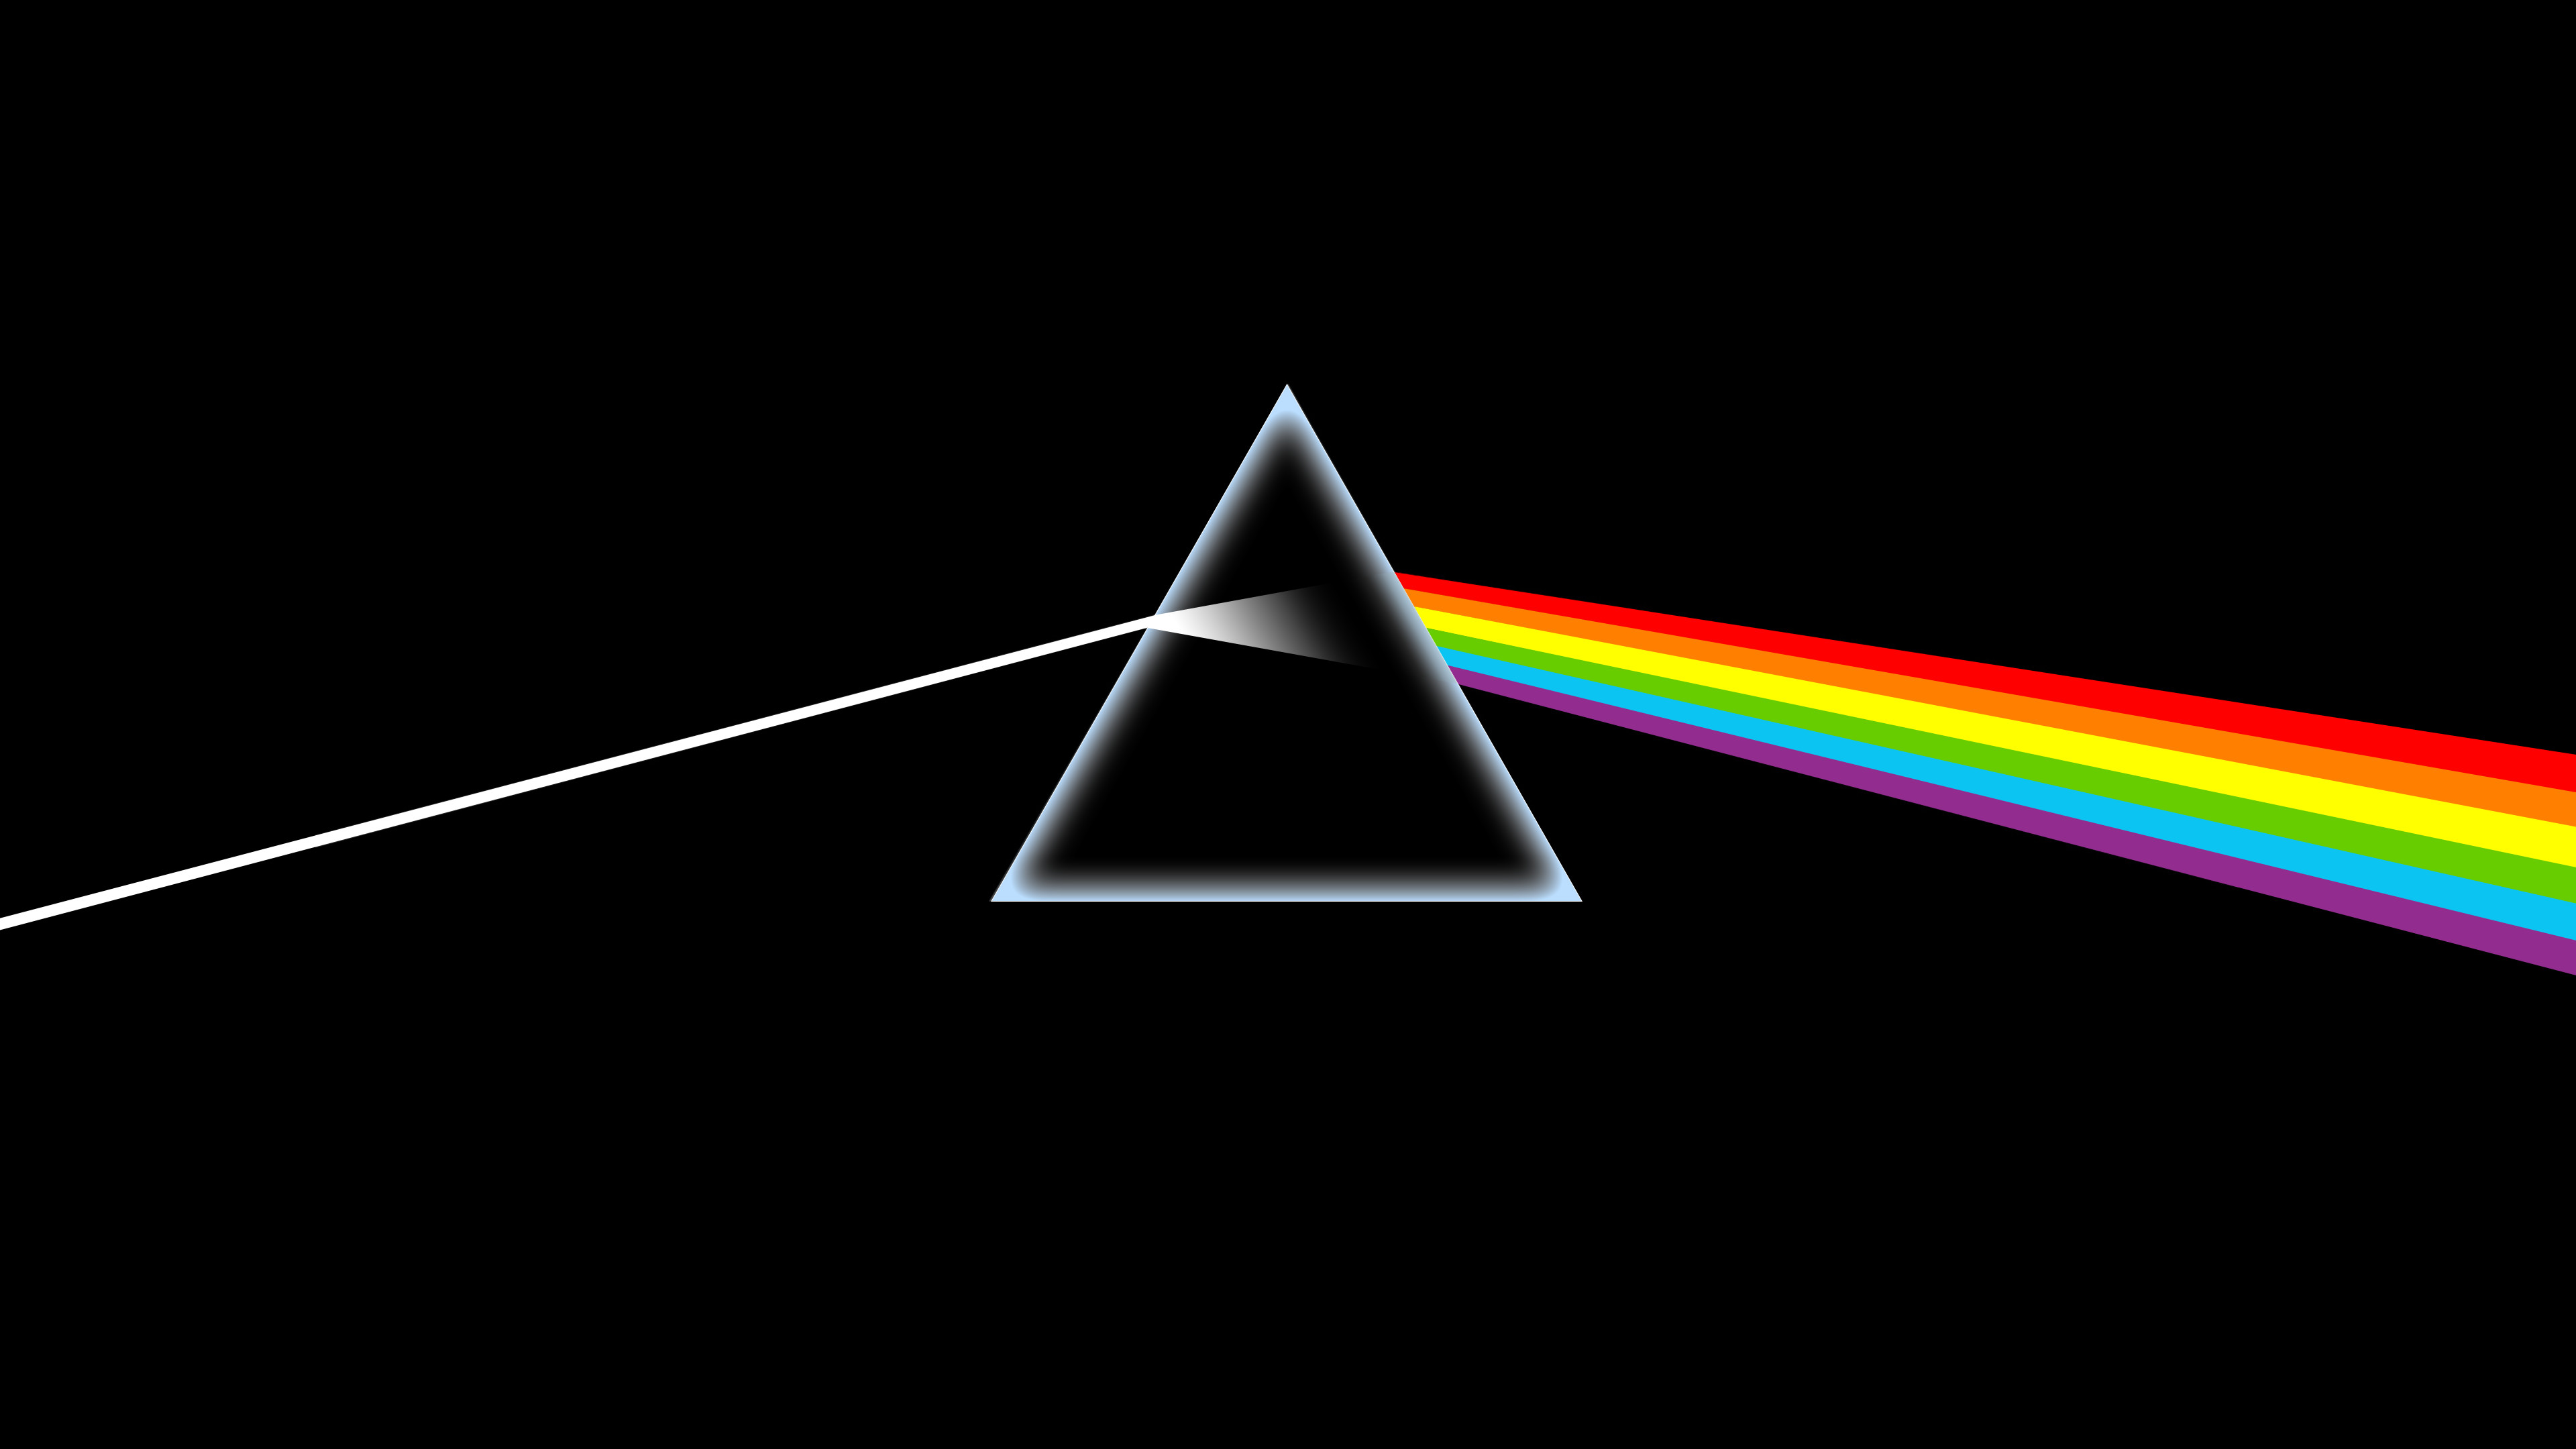 3840x2160 The Dark Side Of The Moon album cover; upscaled to 4k [OC]